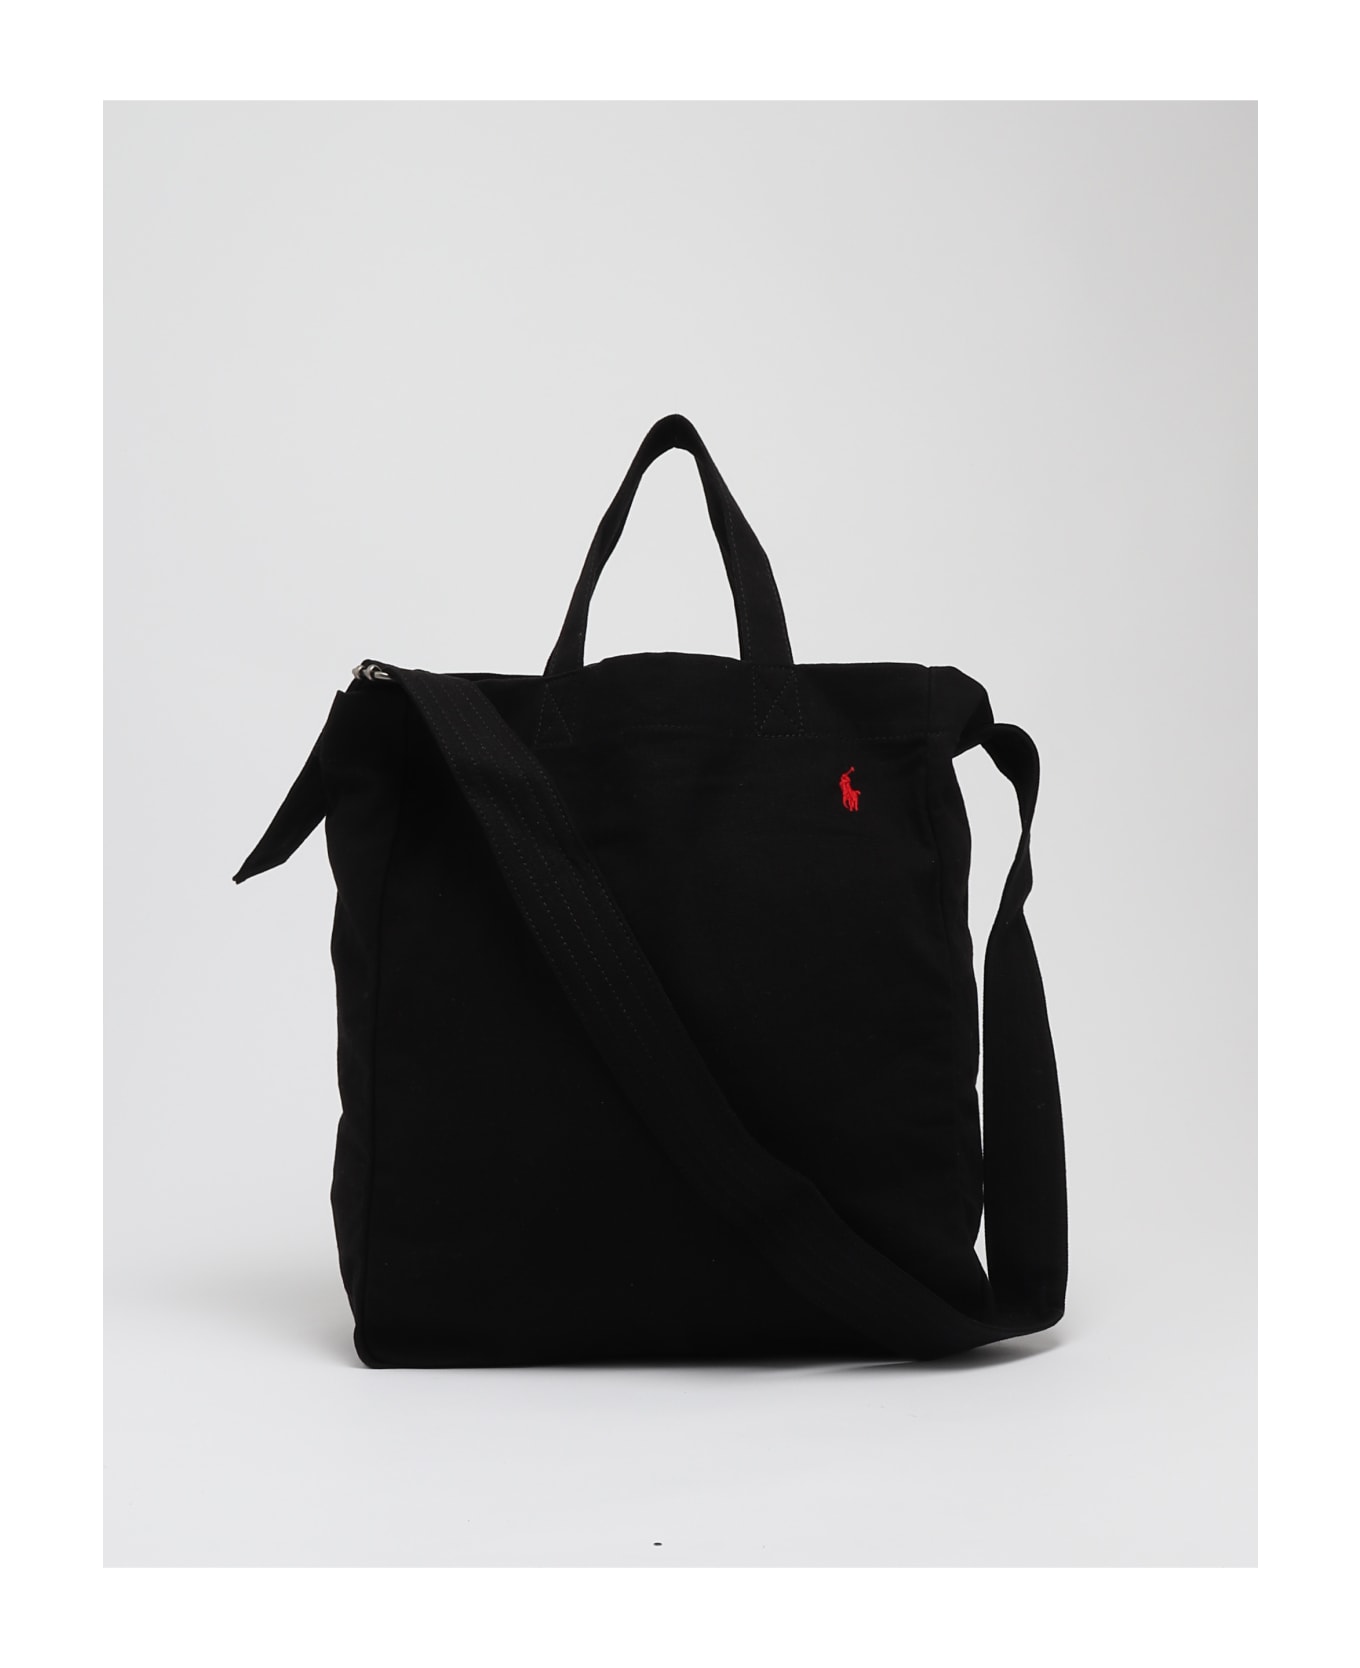 Polo Ralph Lauren Tote Large Canvas Tote - NERO トートバッグ